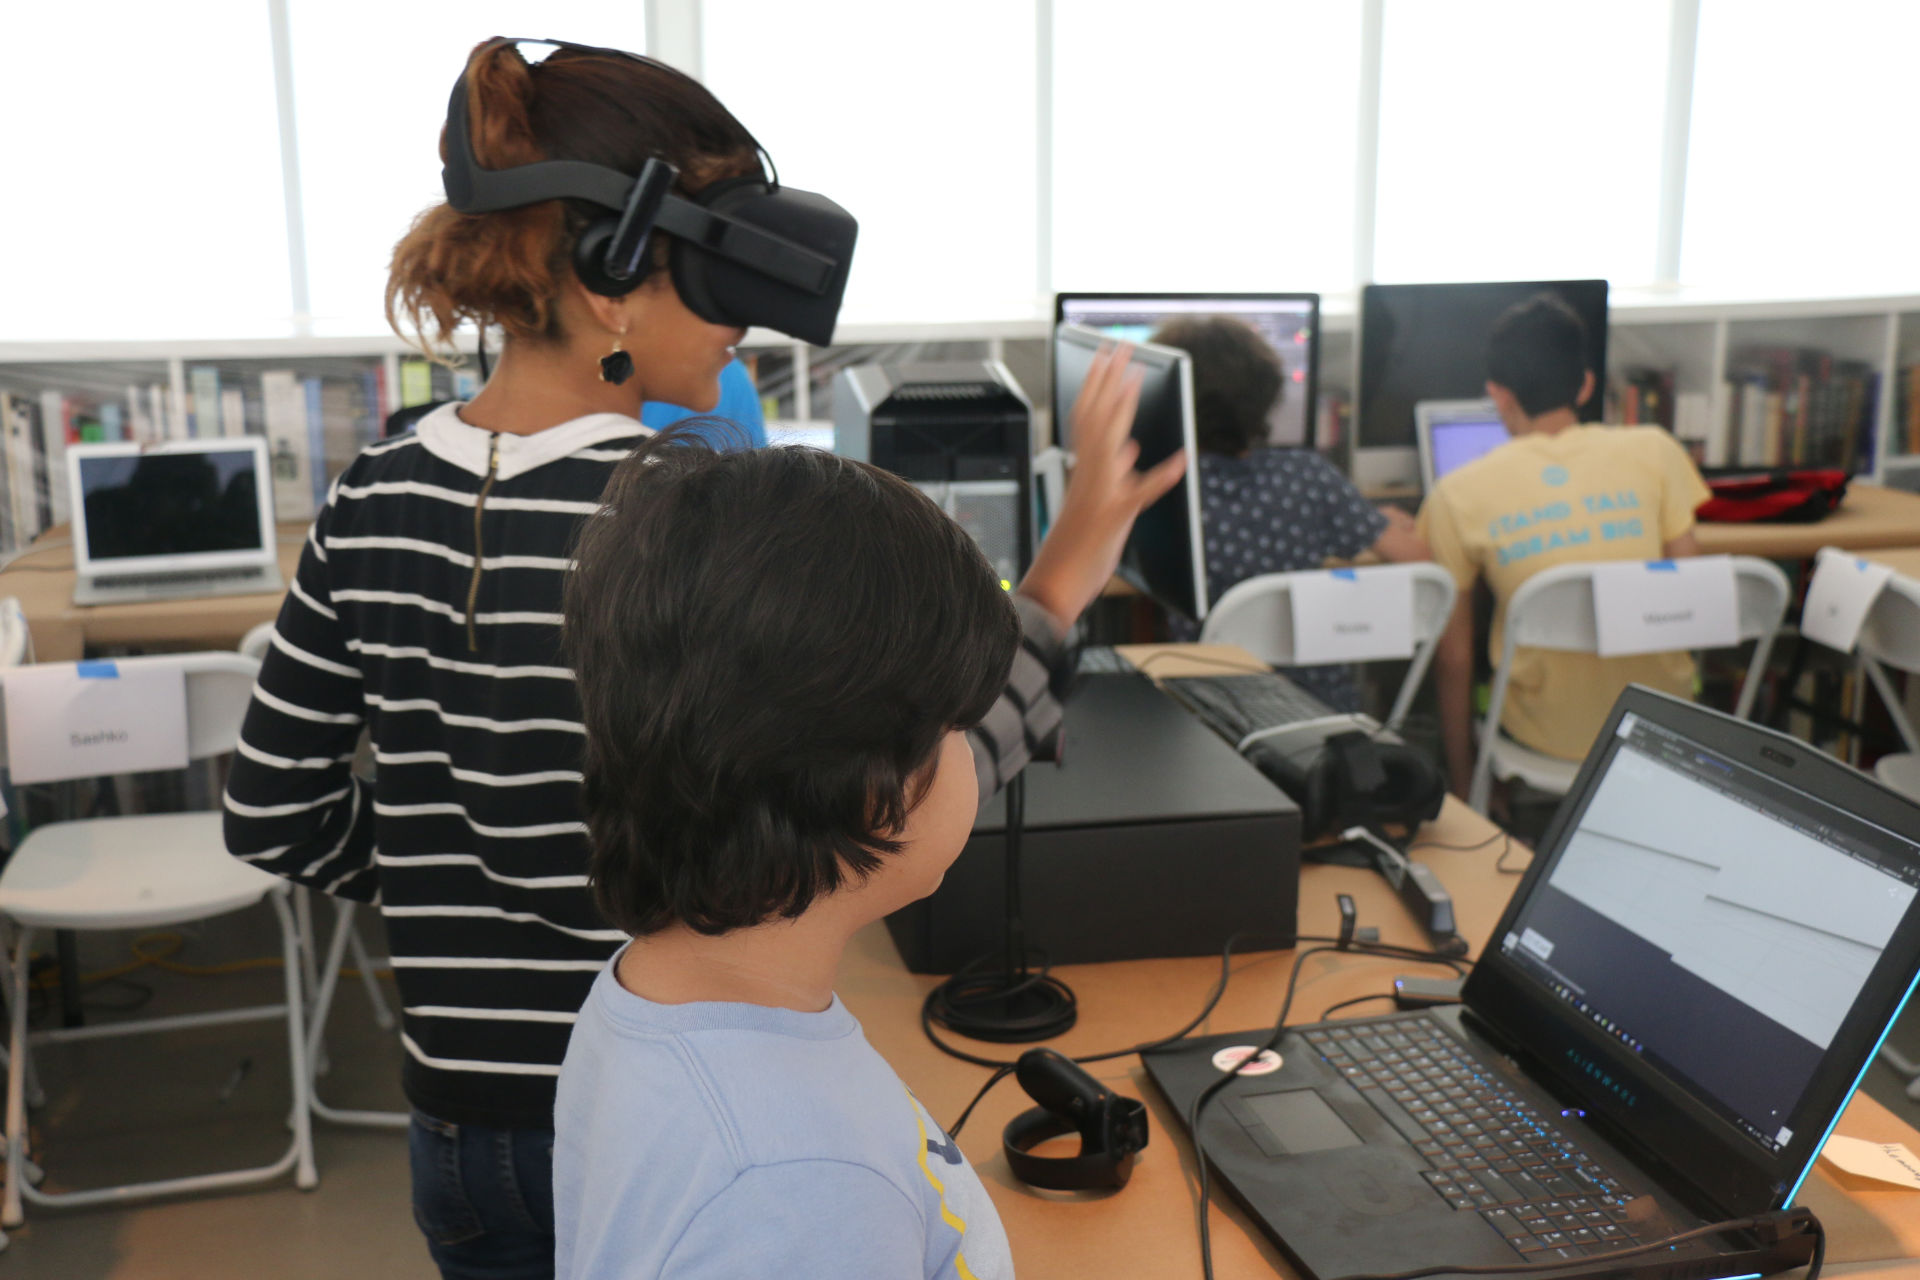 Kids playing while using an Oculus at XRCamp